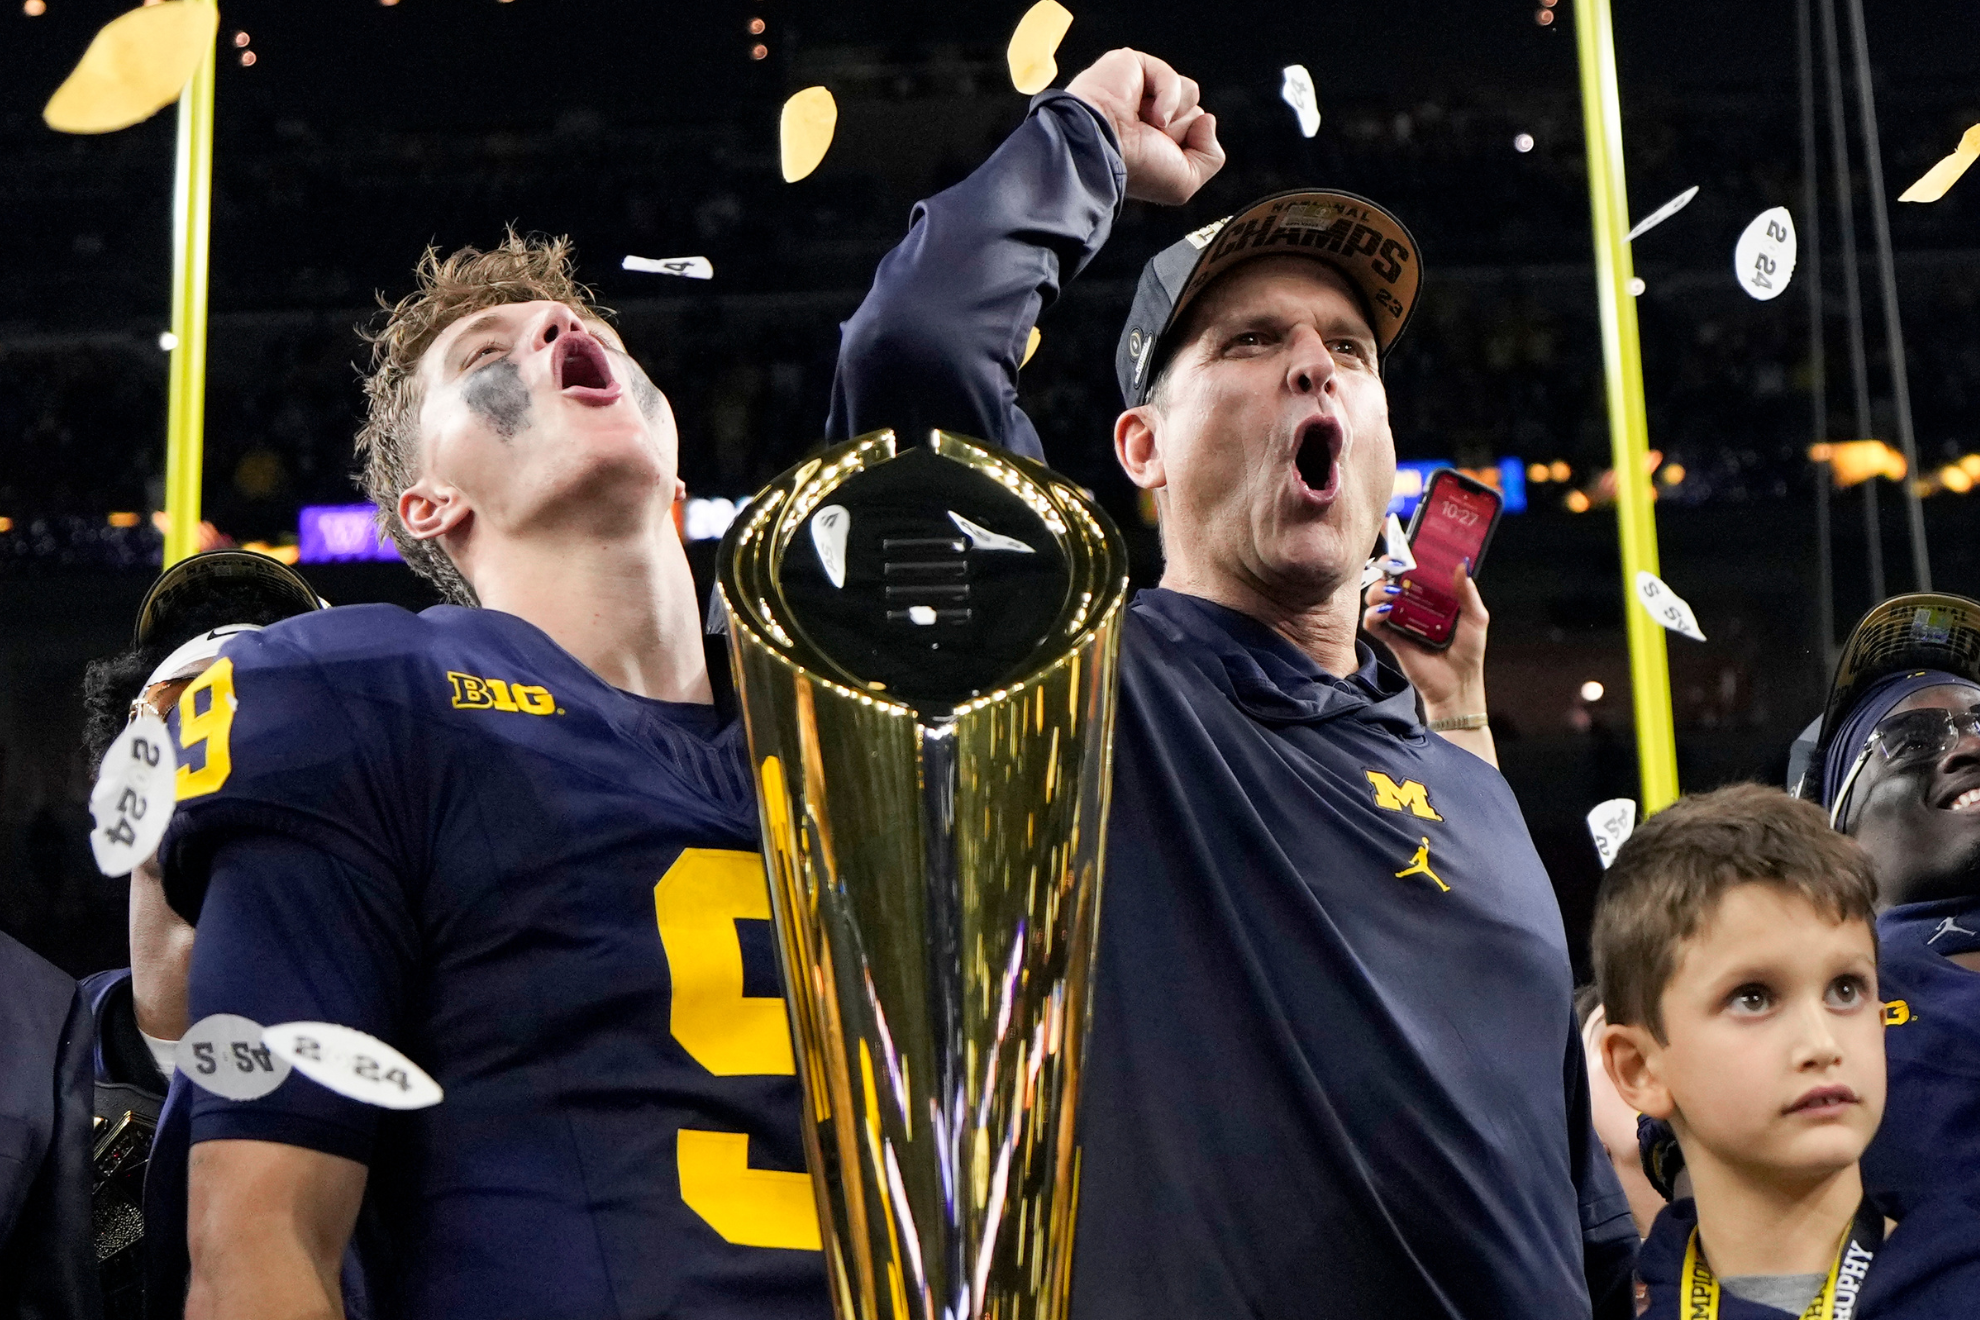 Harbaugh (right) and McCarthy (left) led the Wolverines championship march.